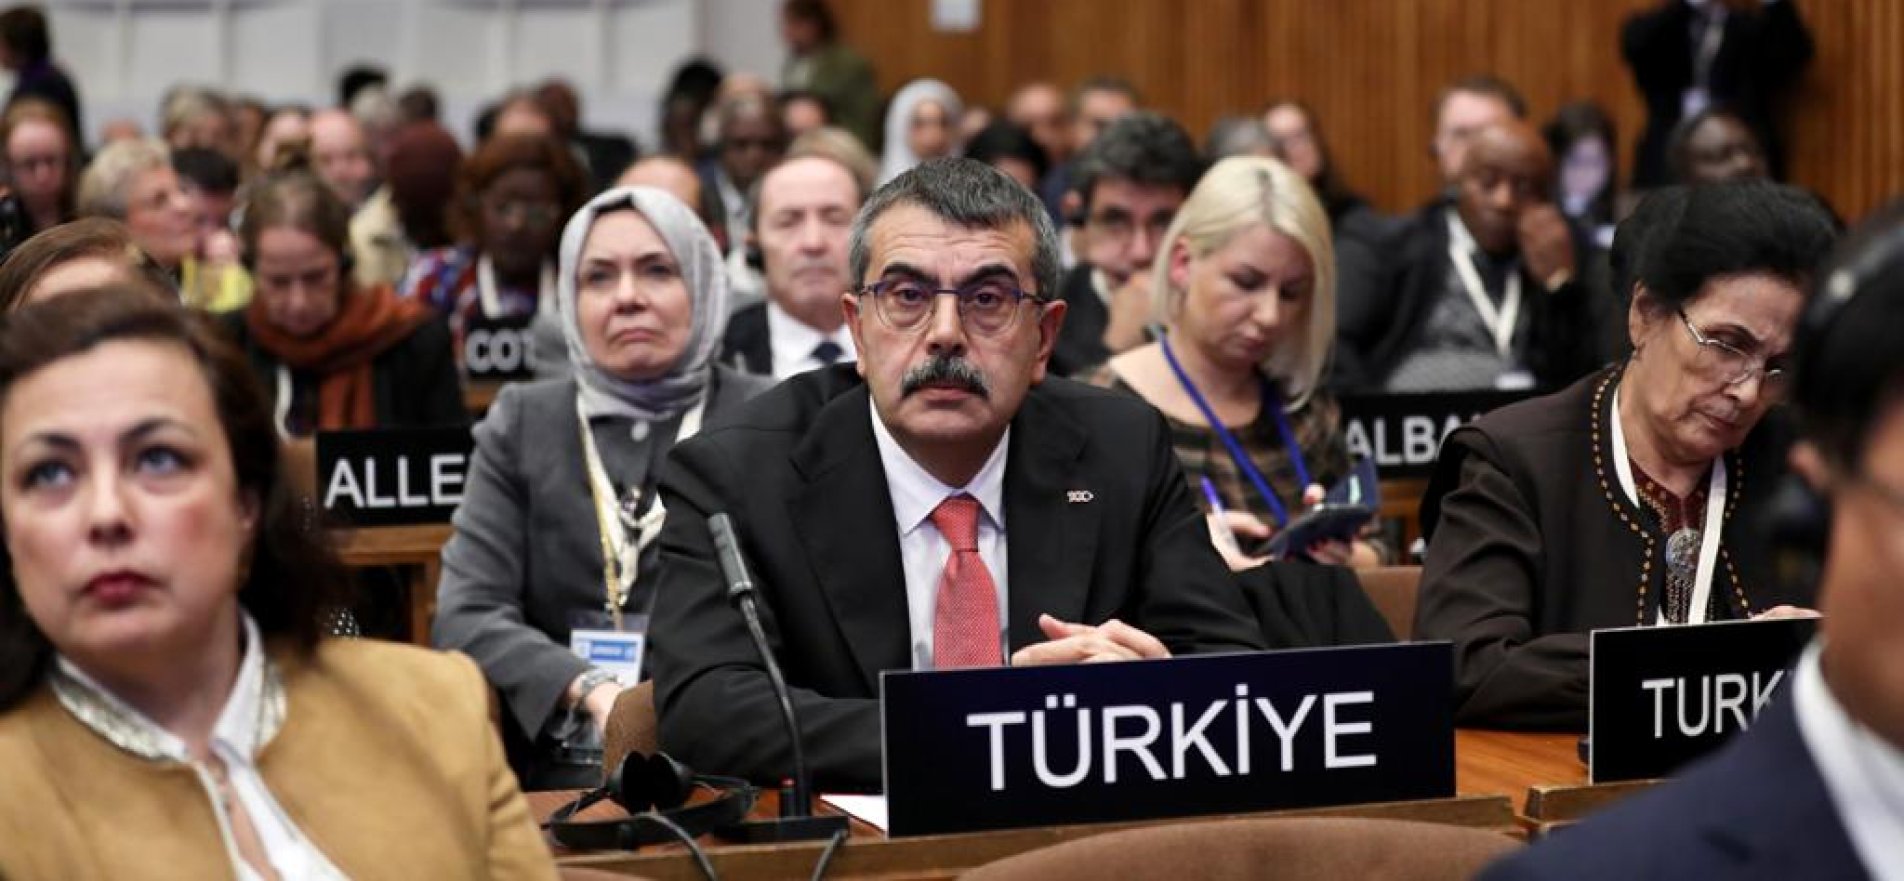 MINISTER TEKİN: THE EVENTS IN GAZA IS NOT A HUMANITARIAN CRISIS,  IT IS A CRIME AGAİNST HUMANITY